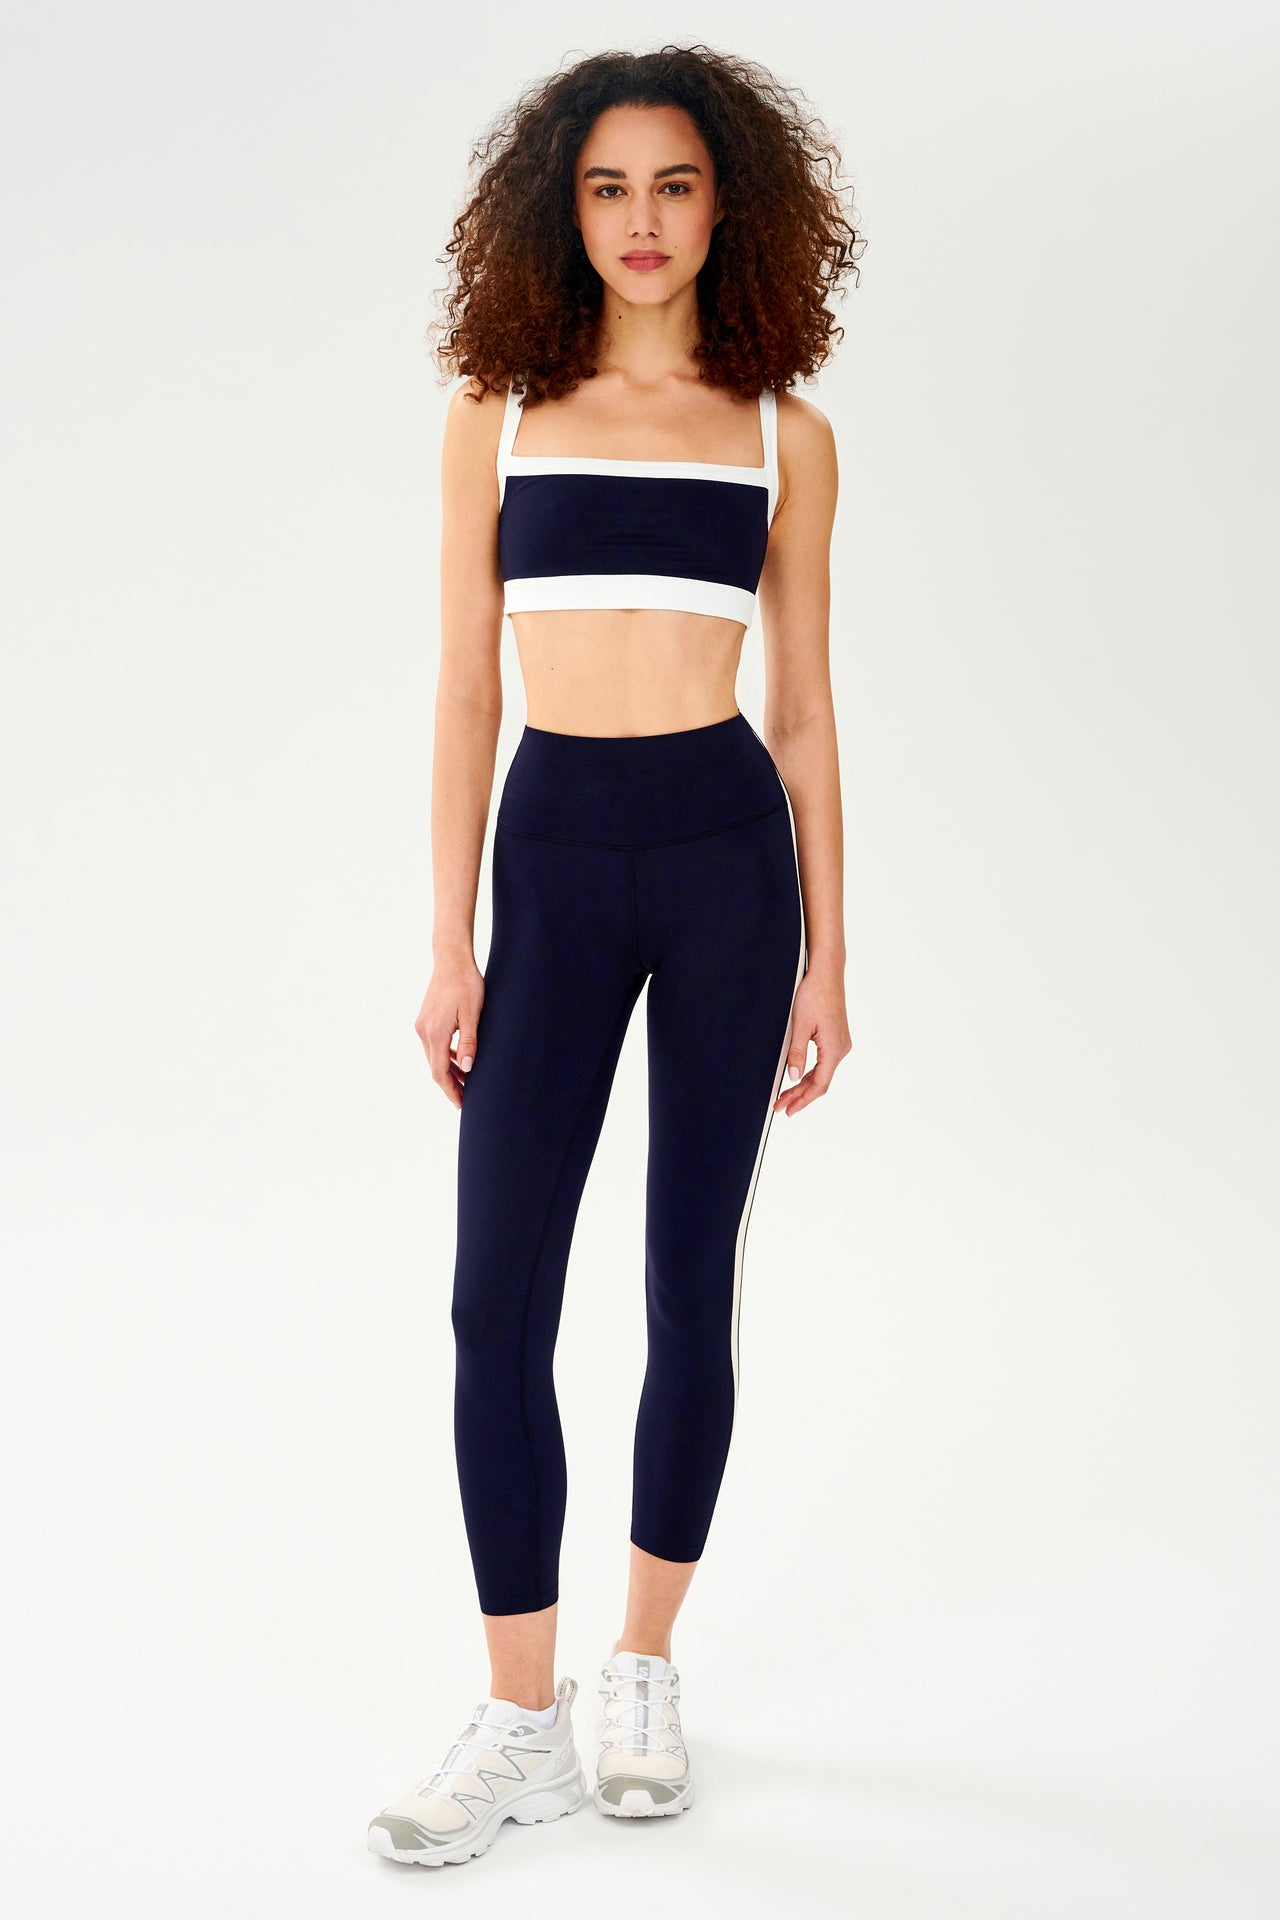 Full front view of girl wearing dark blue leggings with a white down the side and a dark blue and white sports bra with white shoes 